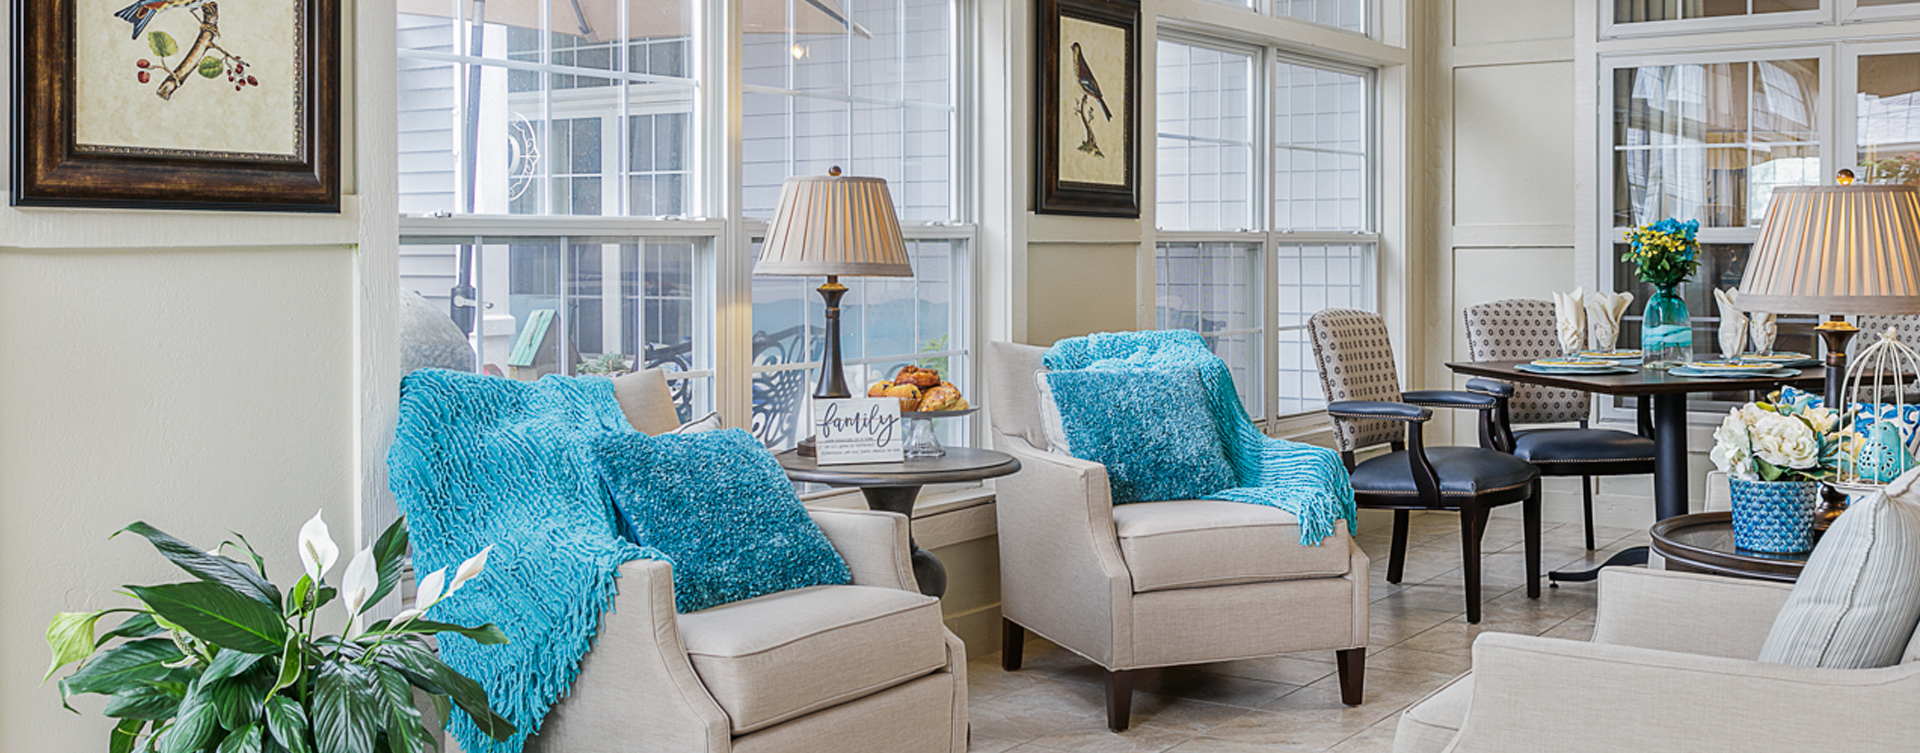 Relax in the warmth of the sunroom at Bickford of Omaha - Blondo